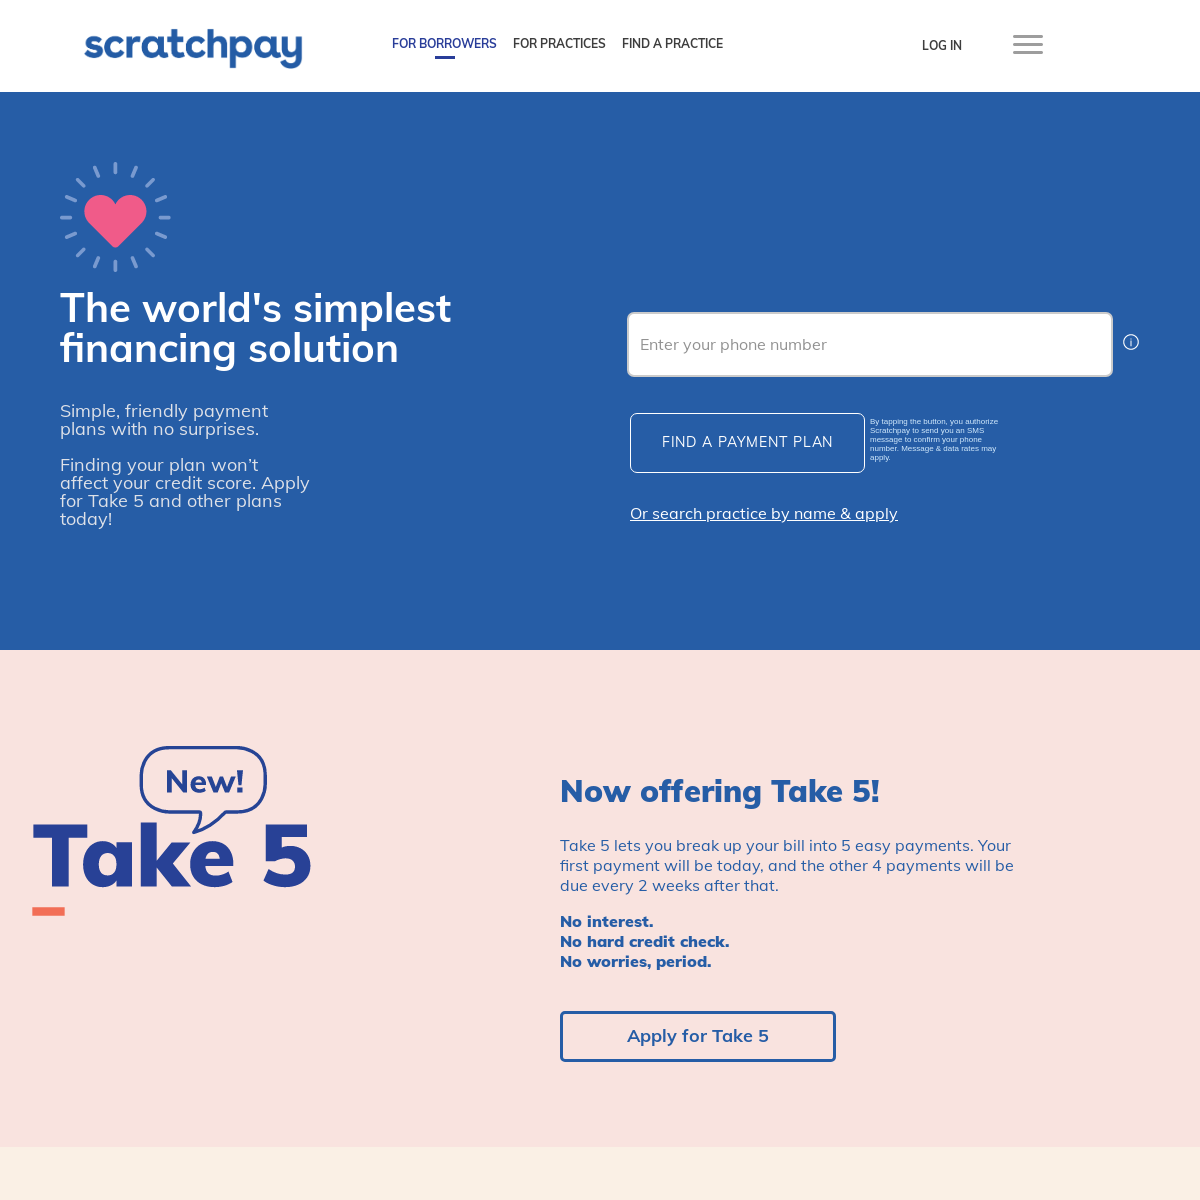 A complete backup of scratchpay.com